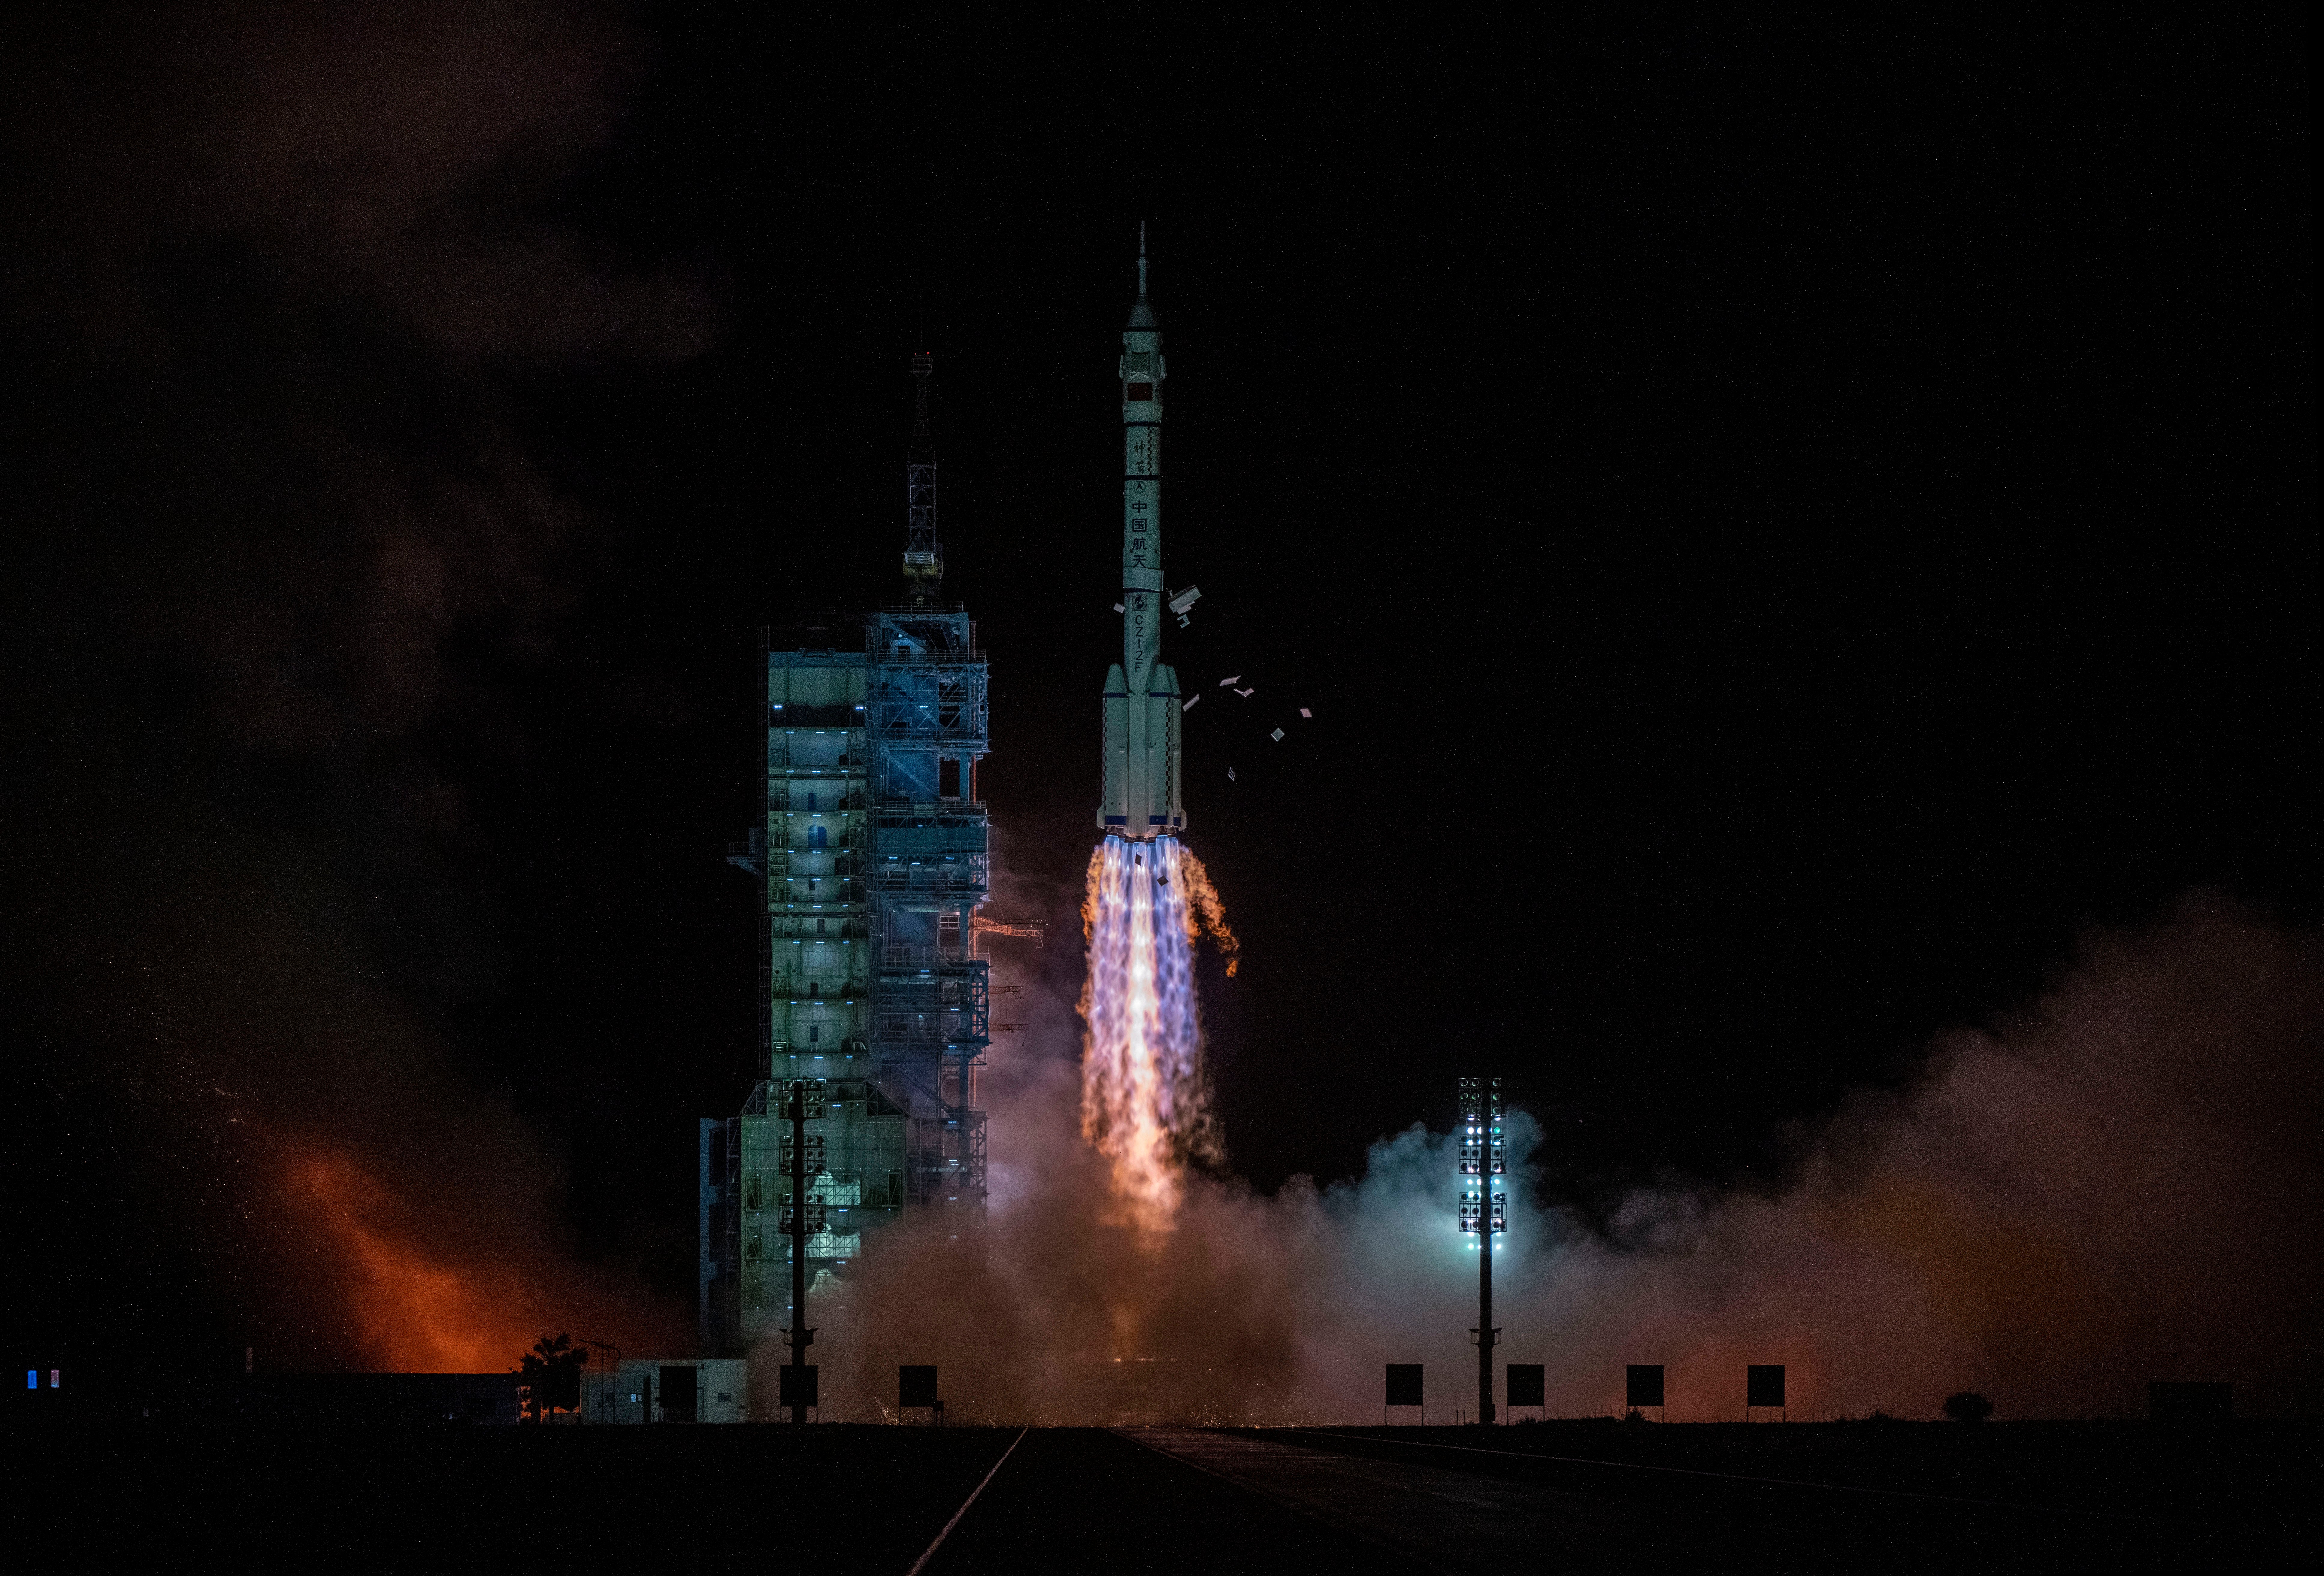 The Shenzhou-13 carried by a Long March-2F rocket launches with three astronauts from China Manned Space Agency on board early on October 16, 2021